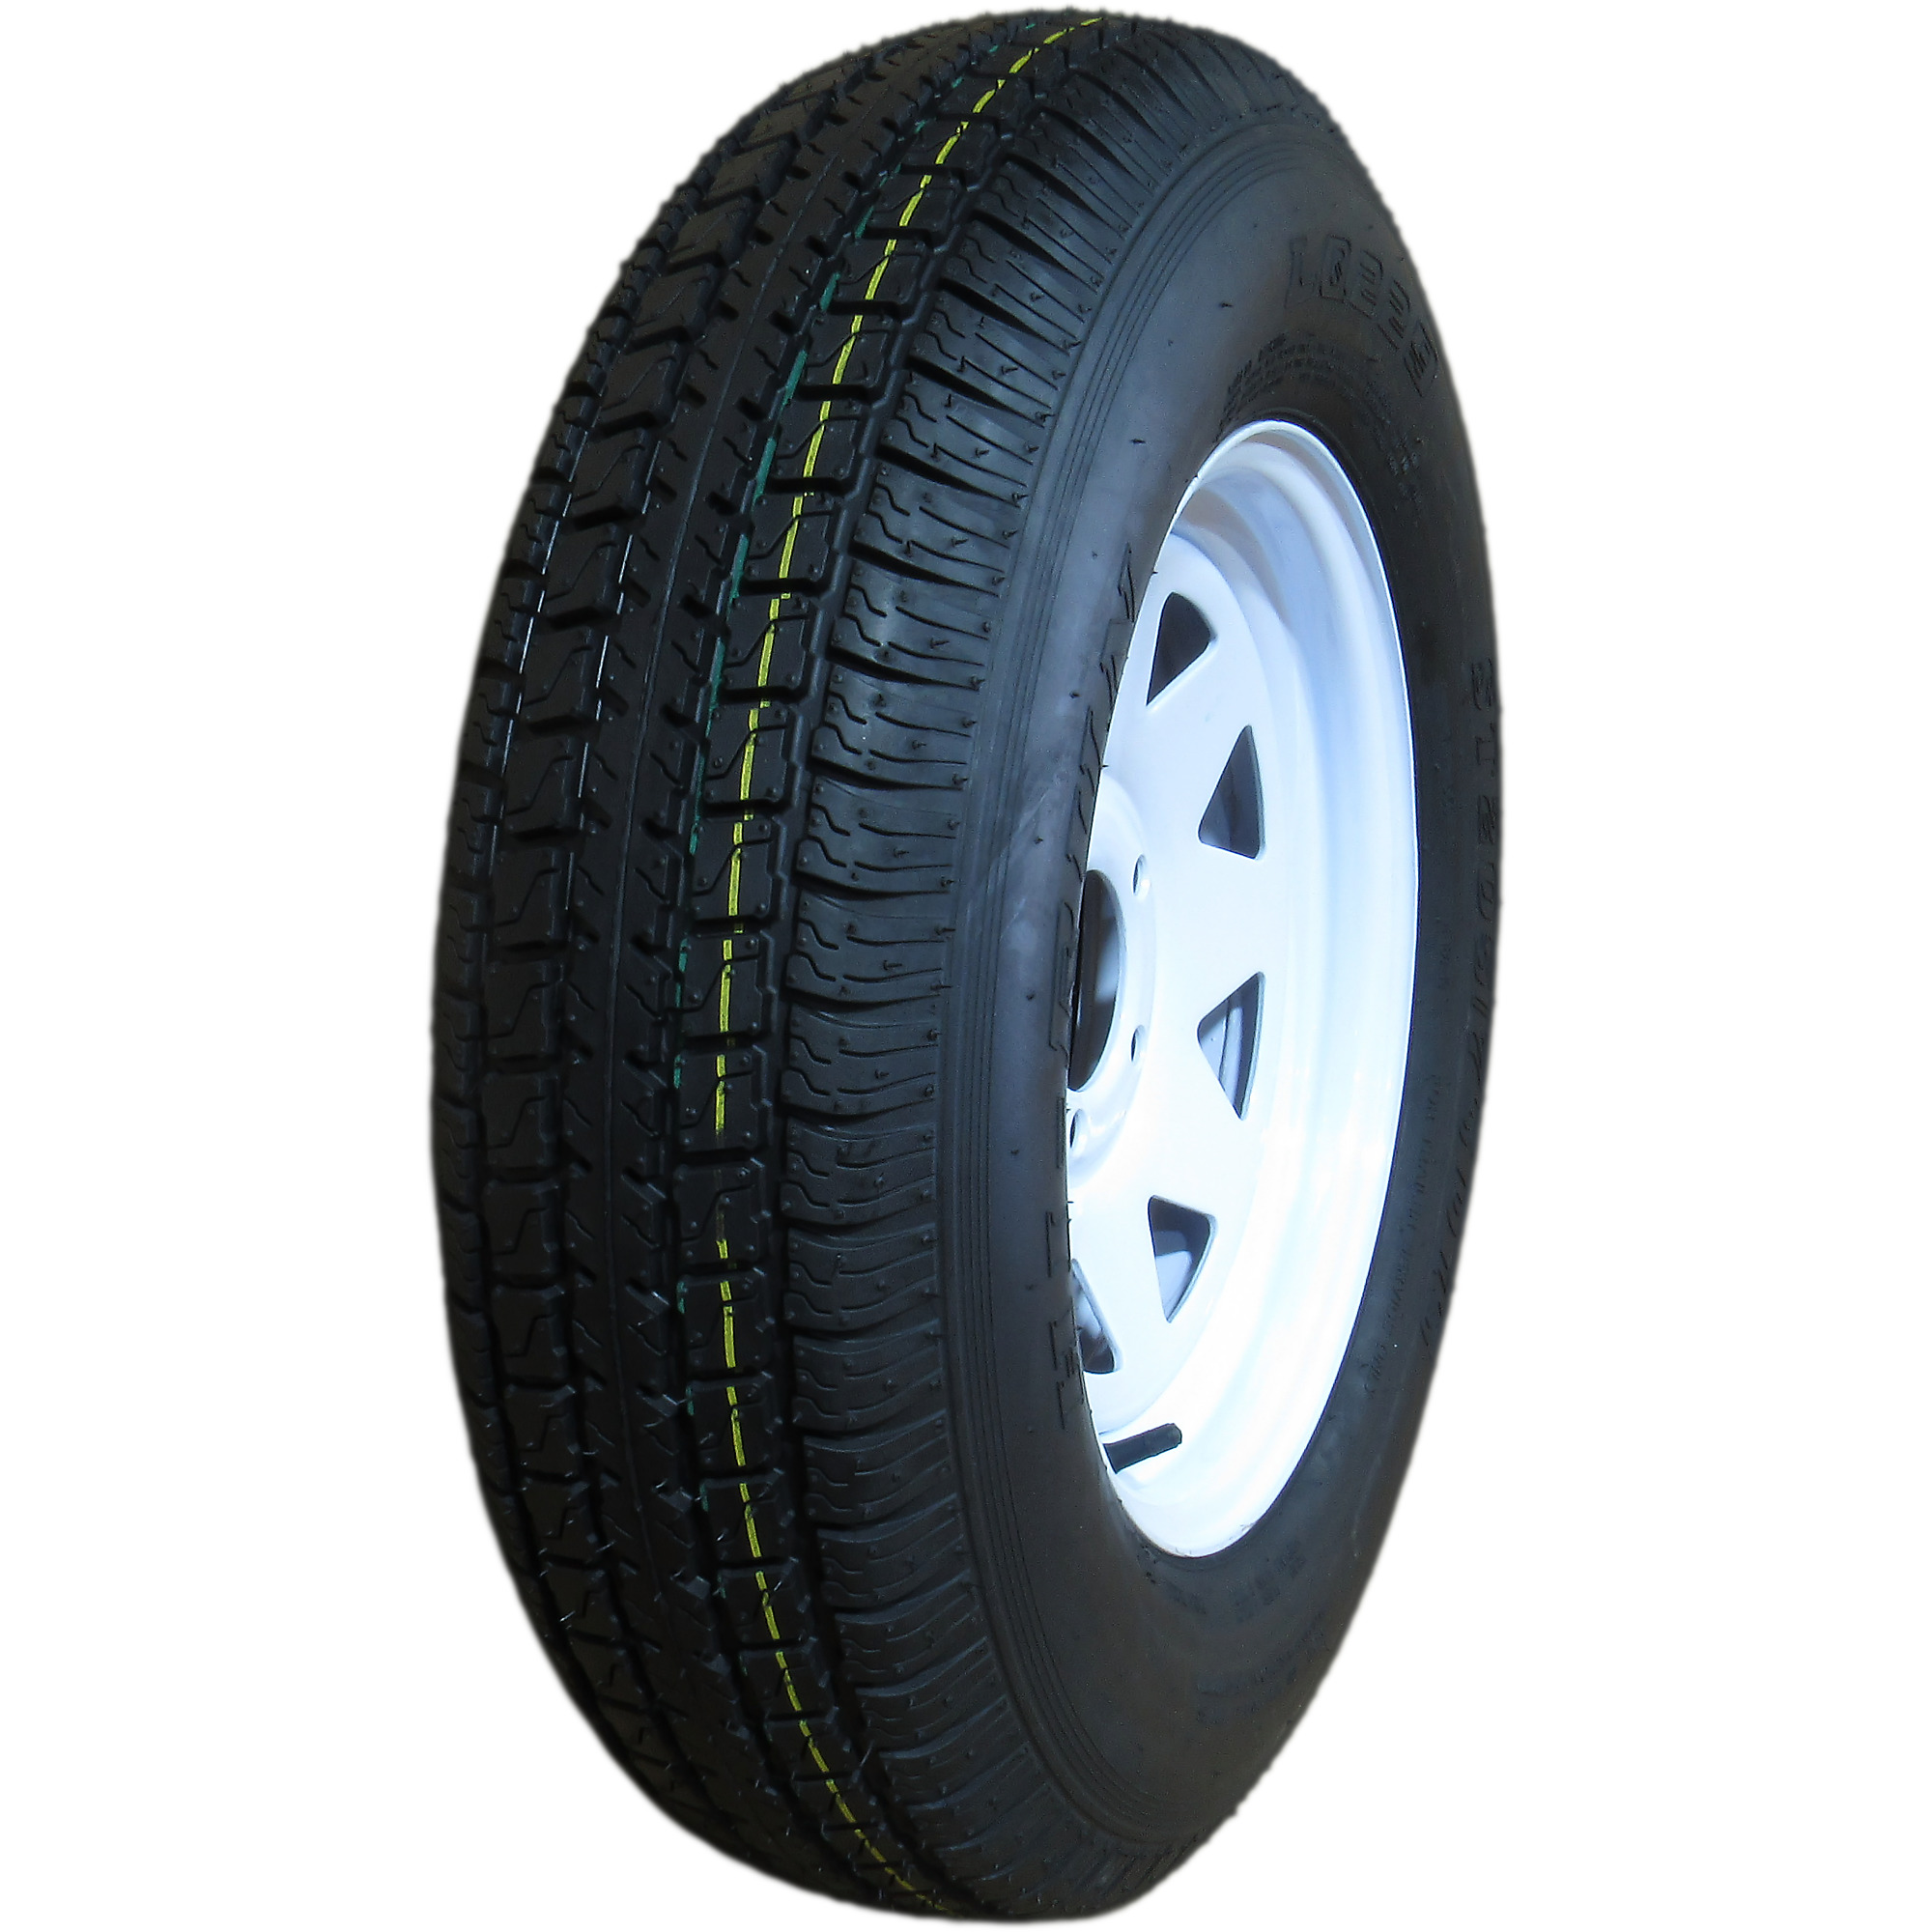 Highway Trailer Tire Assembly, Bias-Ply, Spoked, Tire Size ST175/80D13, Load Range Rating C, Bolt Holes (qty.) 5, Model - HI-RUN ASB1001